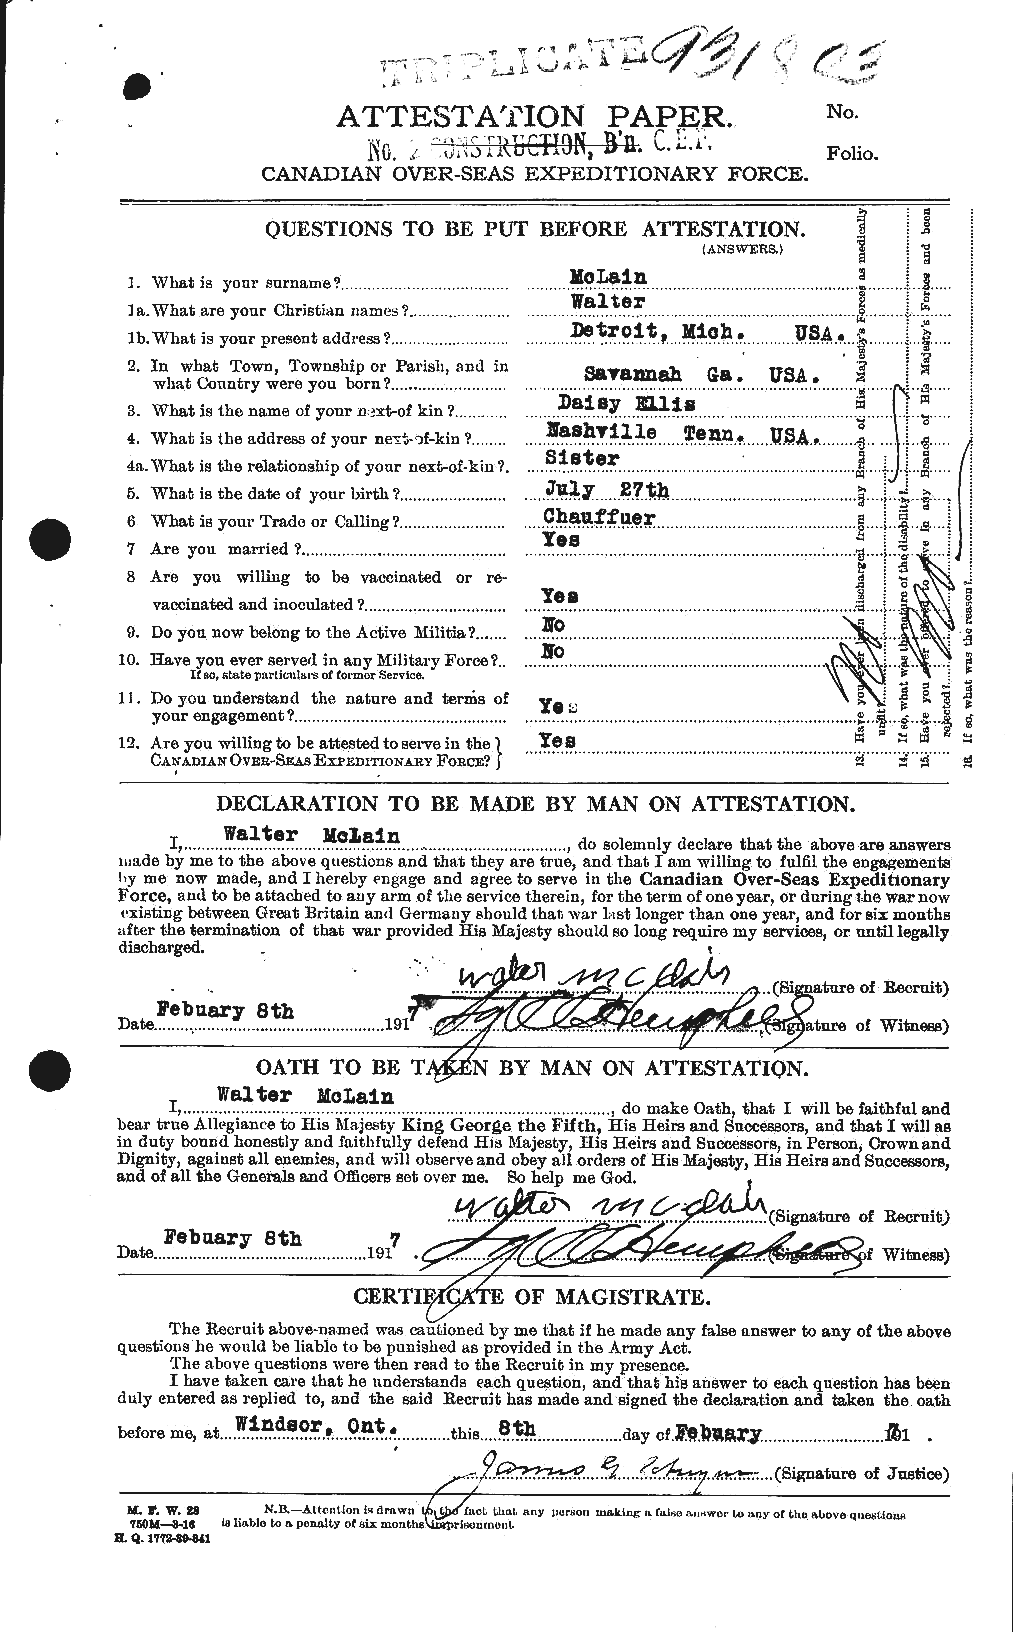 Personnel Records of the First World War - CEF 533994a